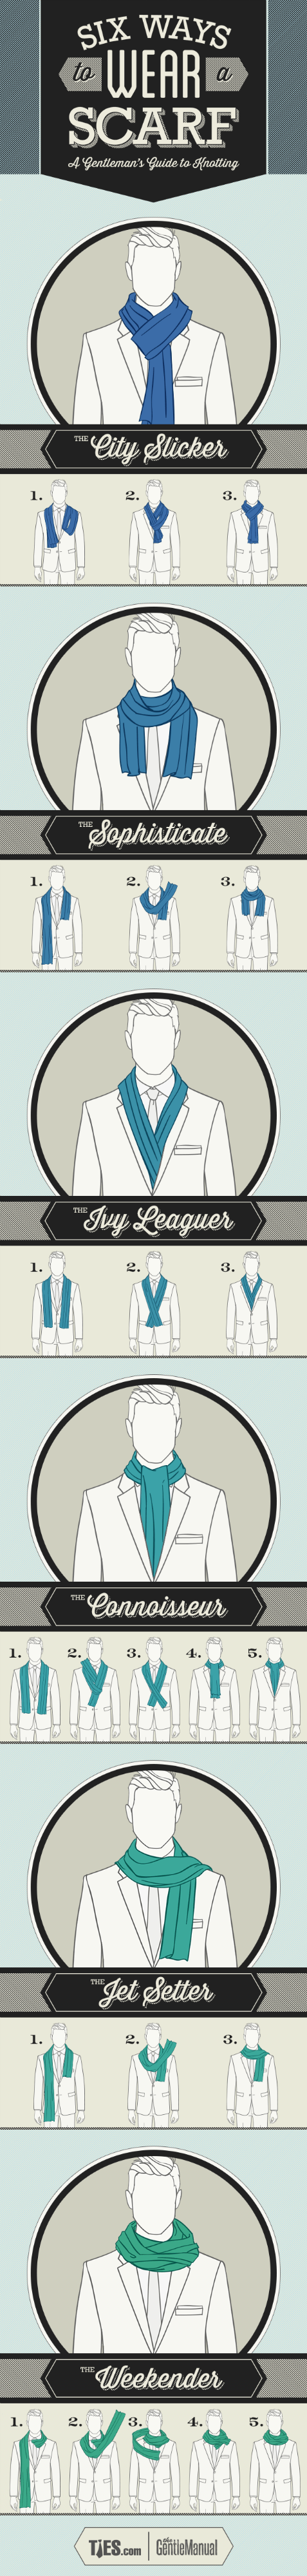 gentlemens-guide-to-scarf-tying_527d8ba4038f4